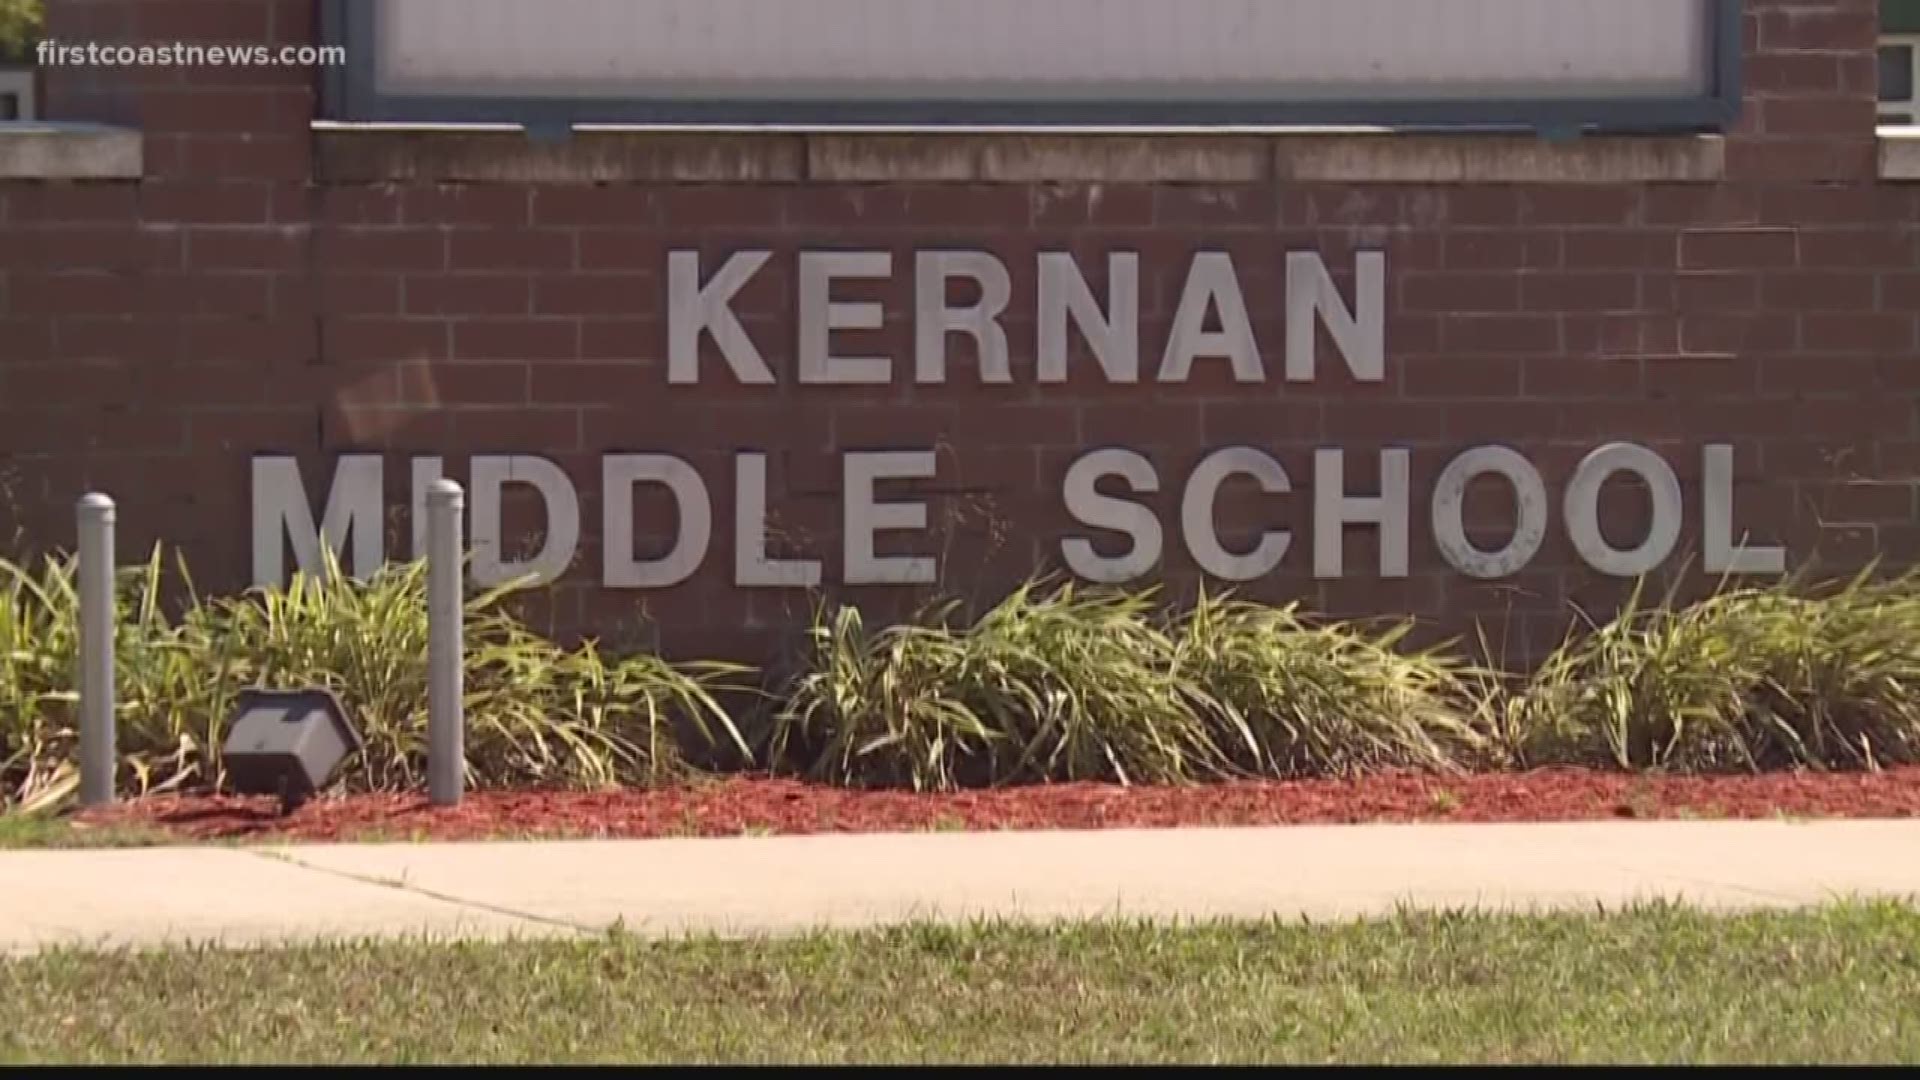 A Judge has recommended the School Board dismiss all the allegations associated with the claims that a Kernan Middle School teacher used the N-word in front of students last year.